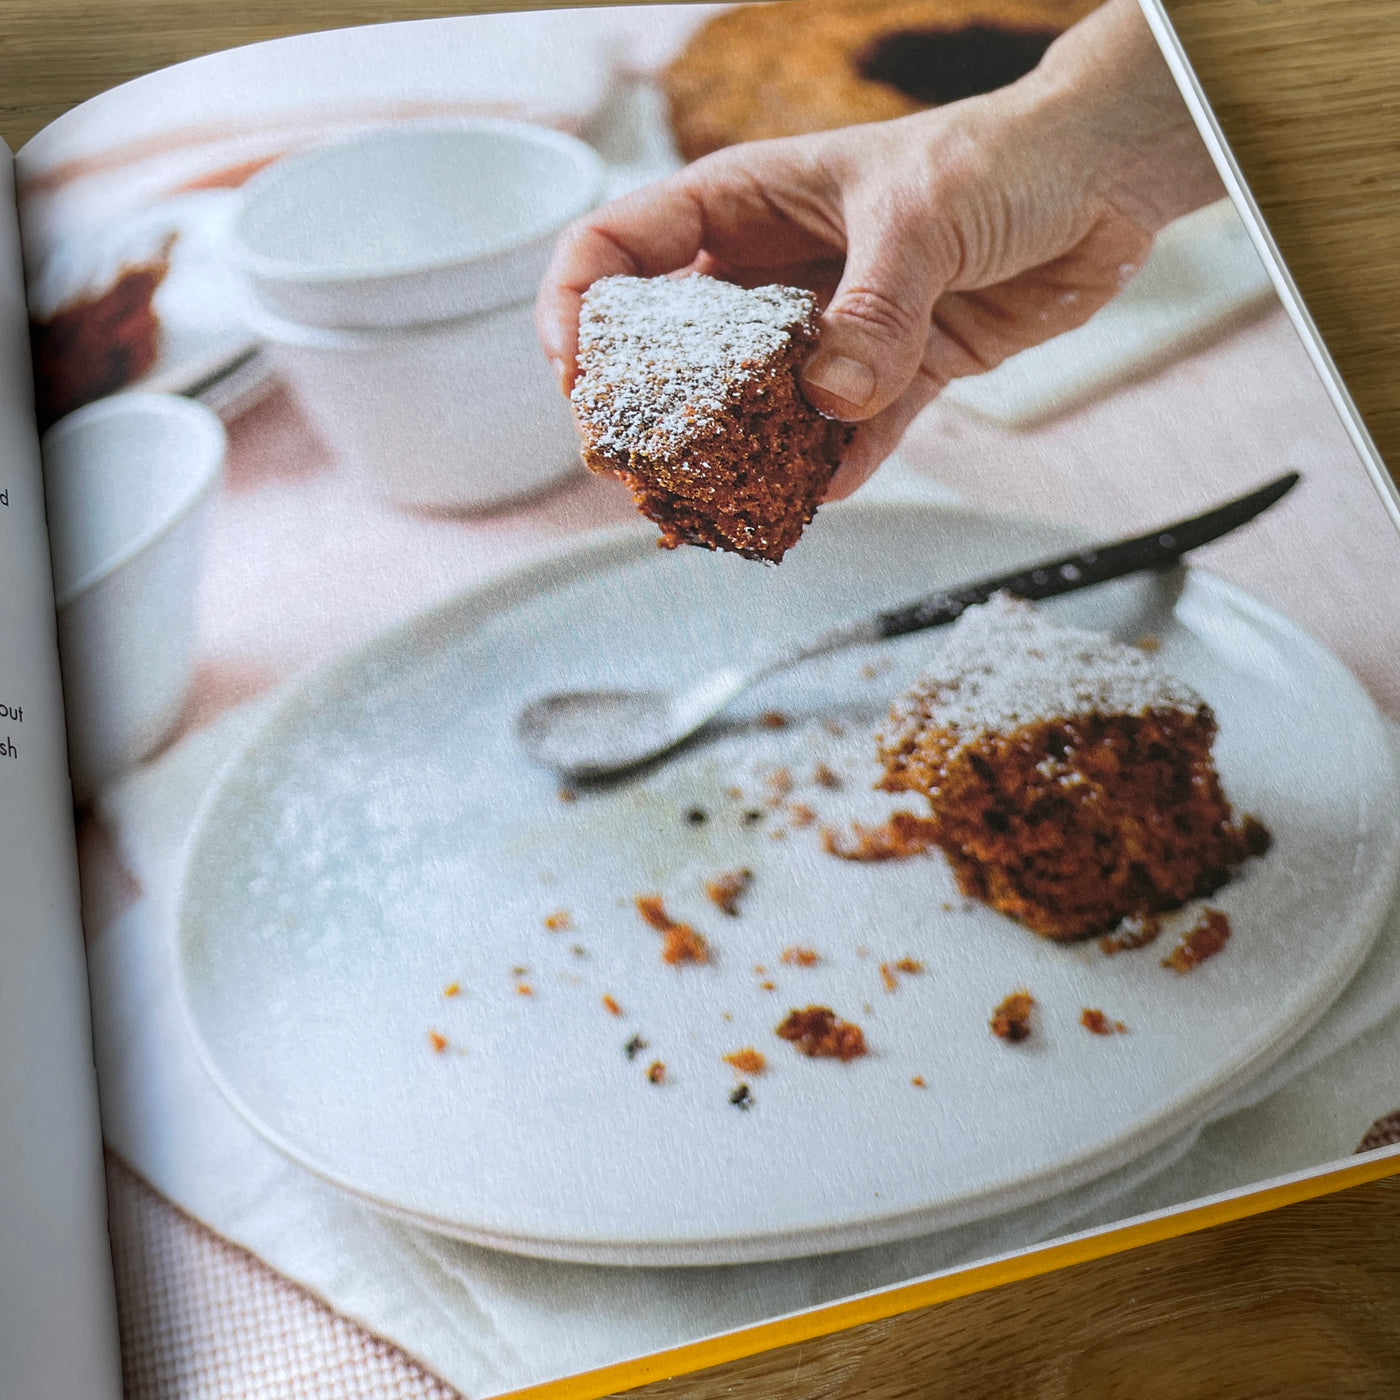 Omnia oven cookery book